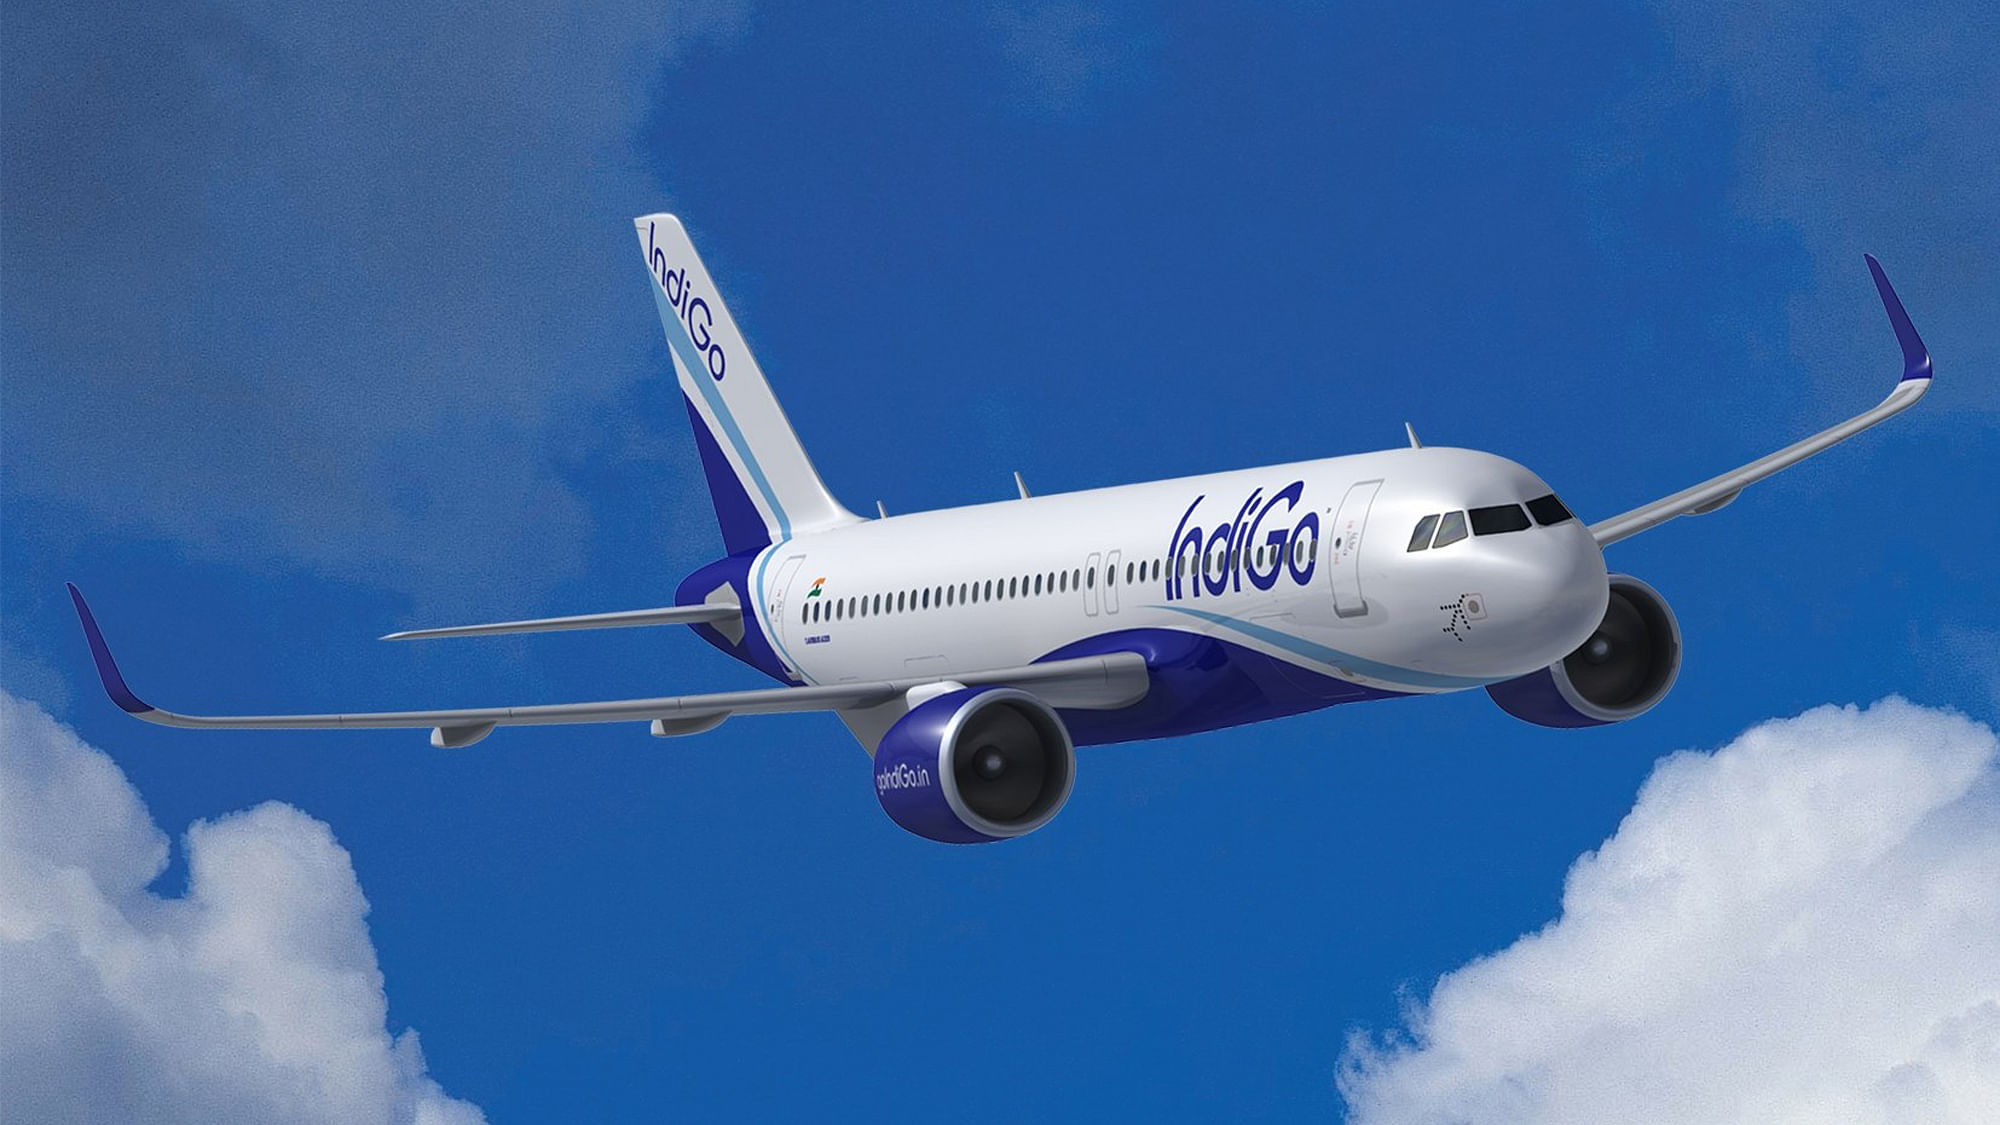  IndiGo recorded a five-fold year-on-year jump in its net profit to Rs 590 crore for the March quarter.